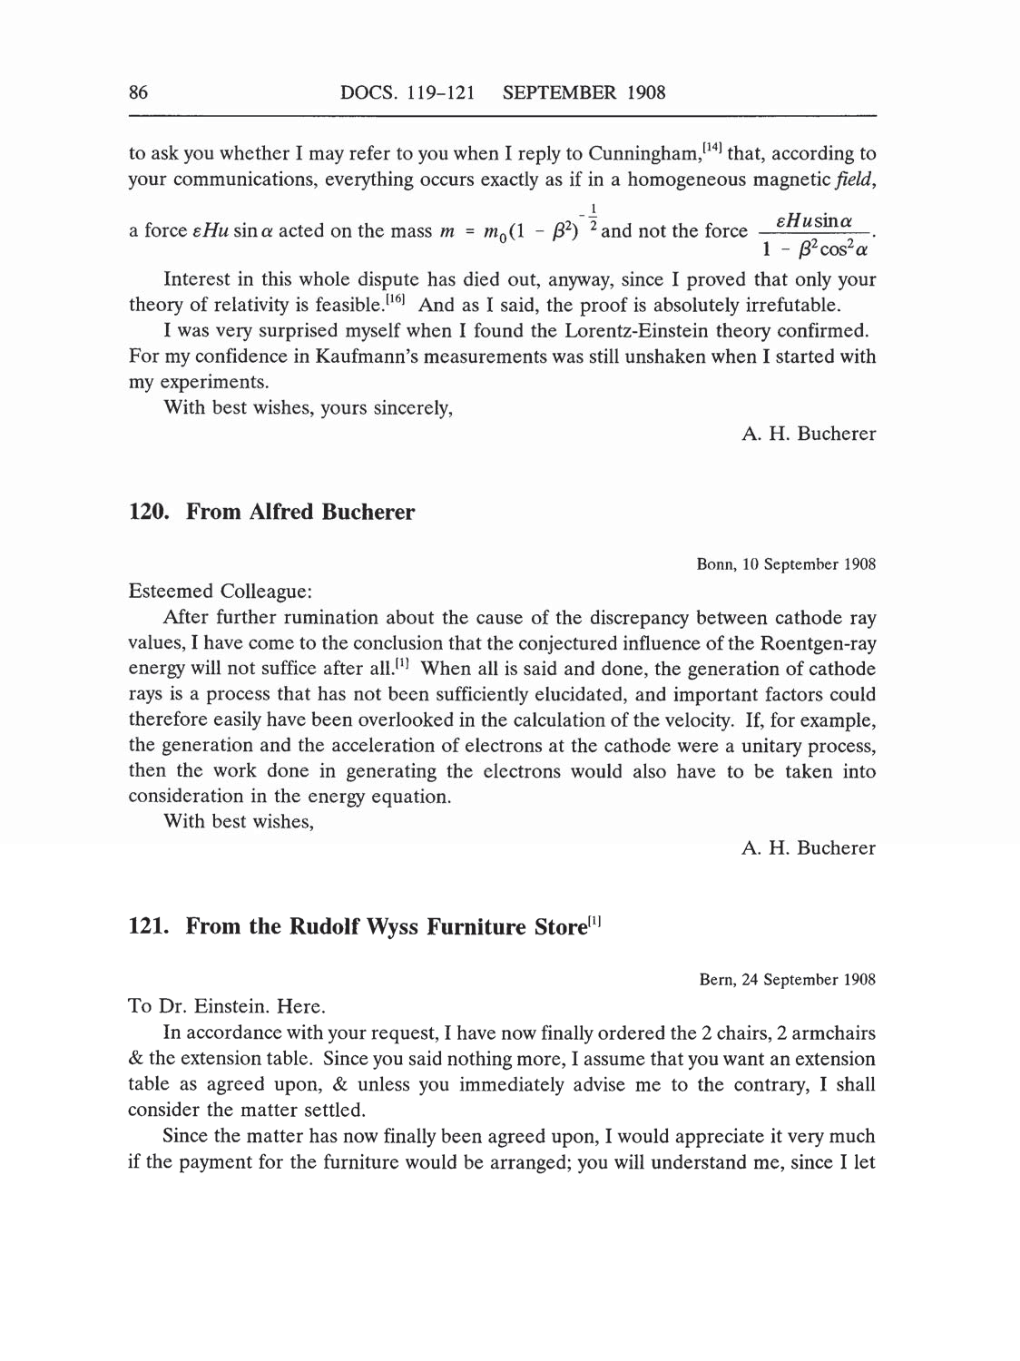 Volume 5: The Swiss Years: Correspondence, 1902-1914 (English translation supplement) page 86